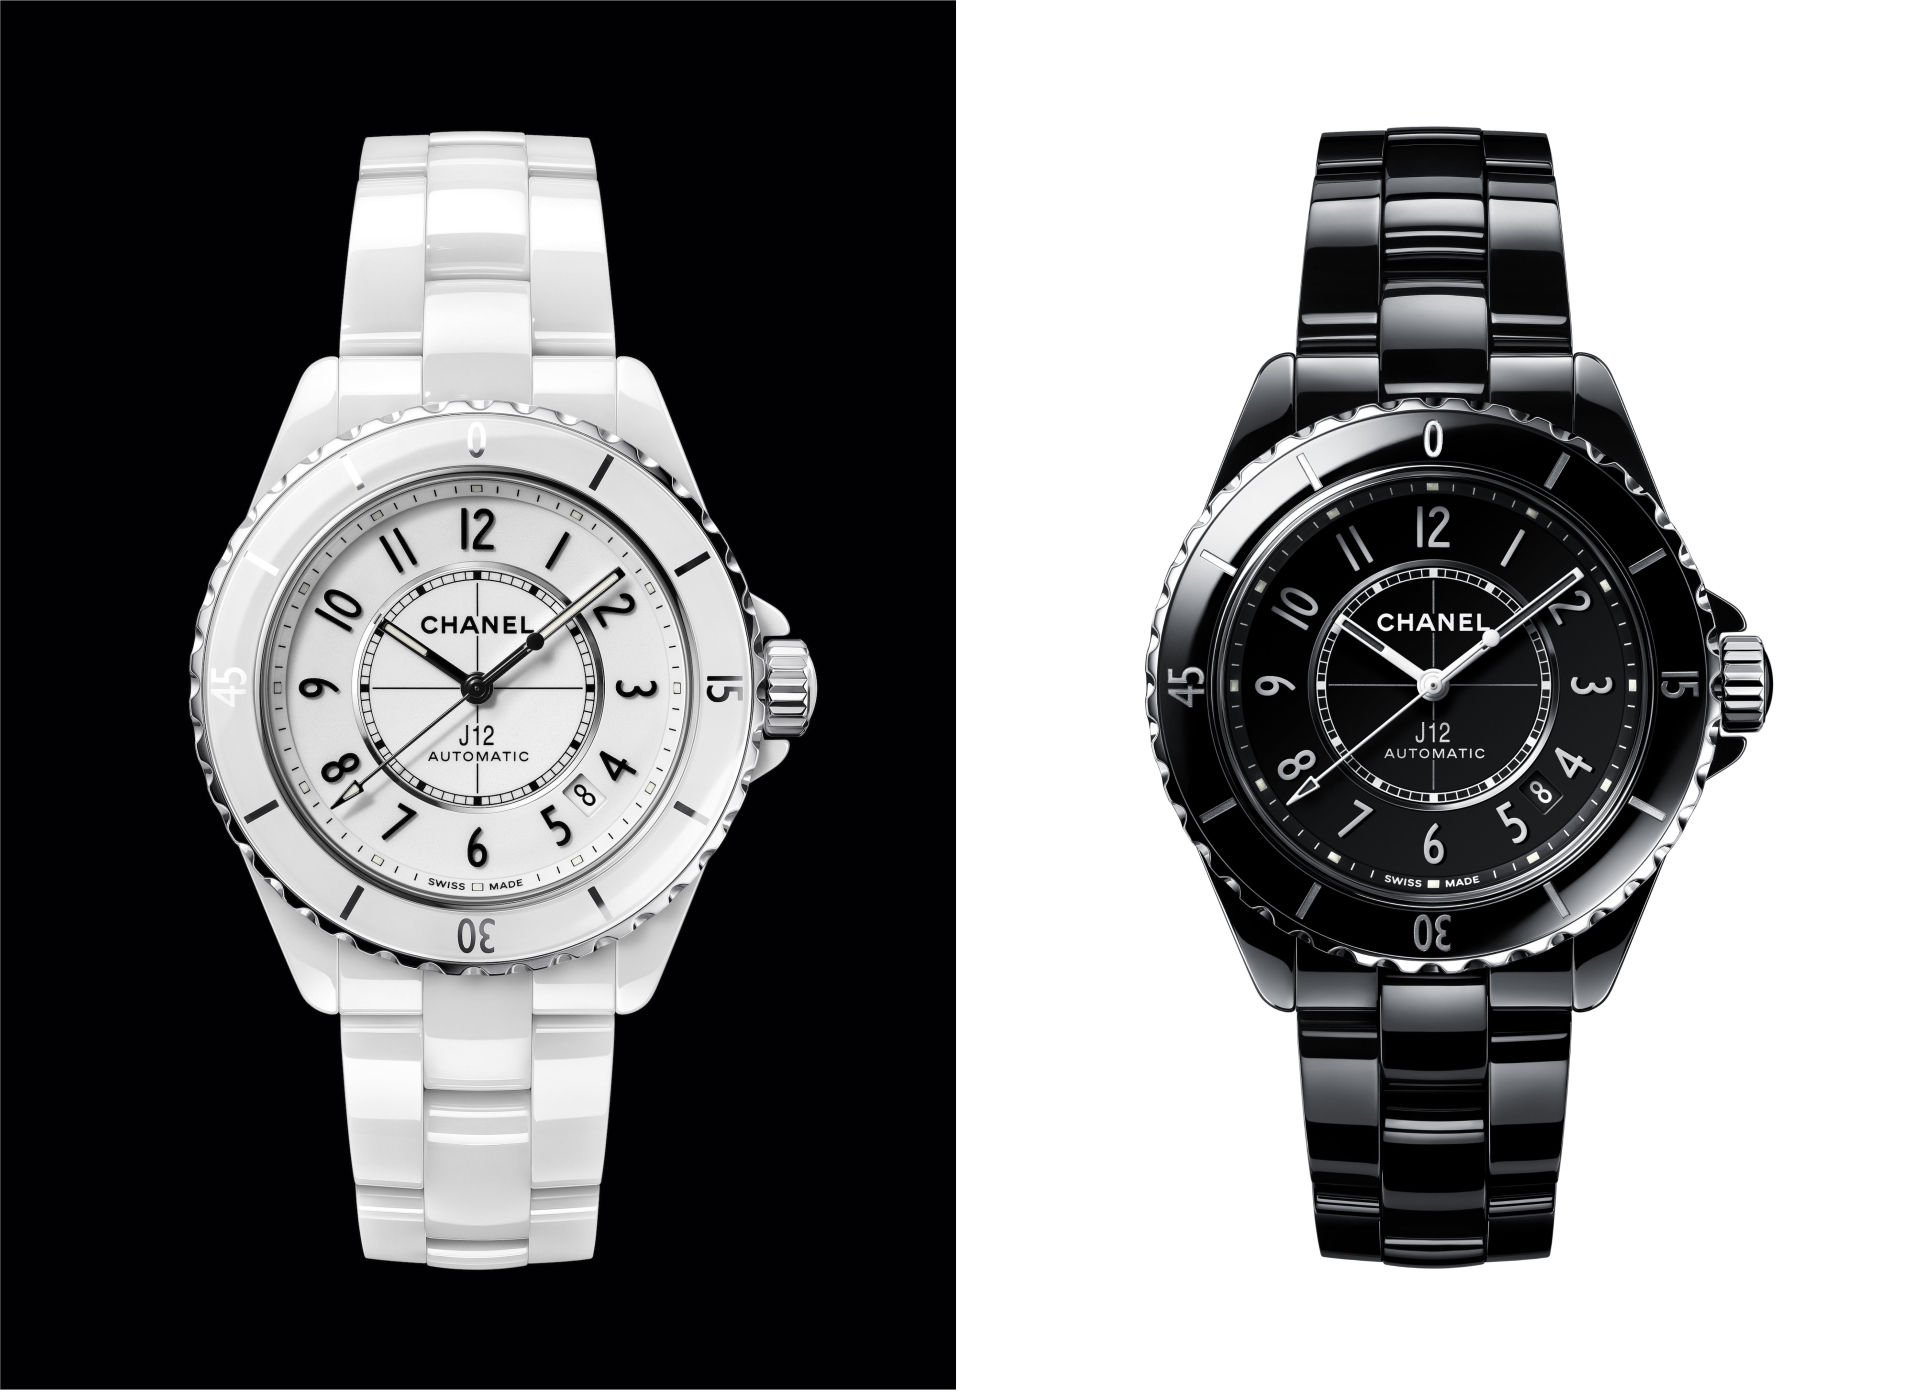 The new Chanel J12 watch gets reworked for its 20th anniversary